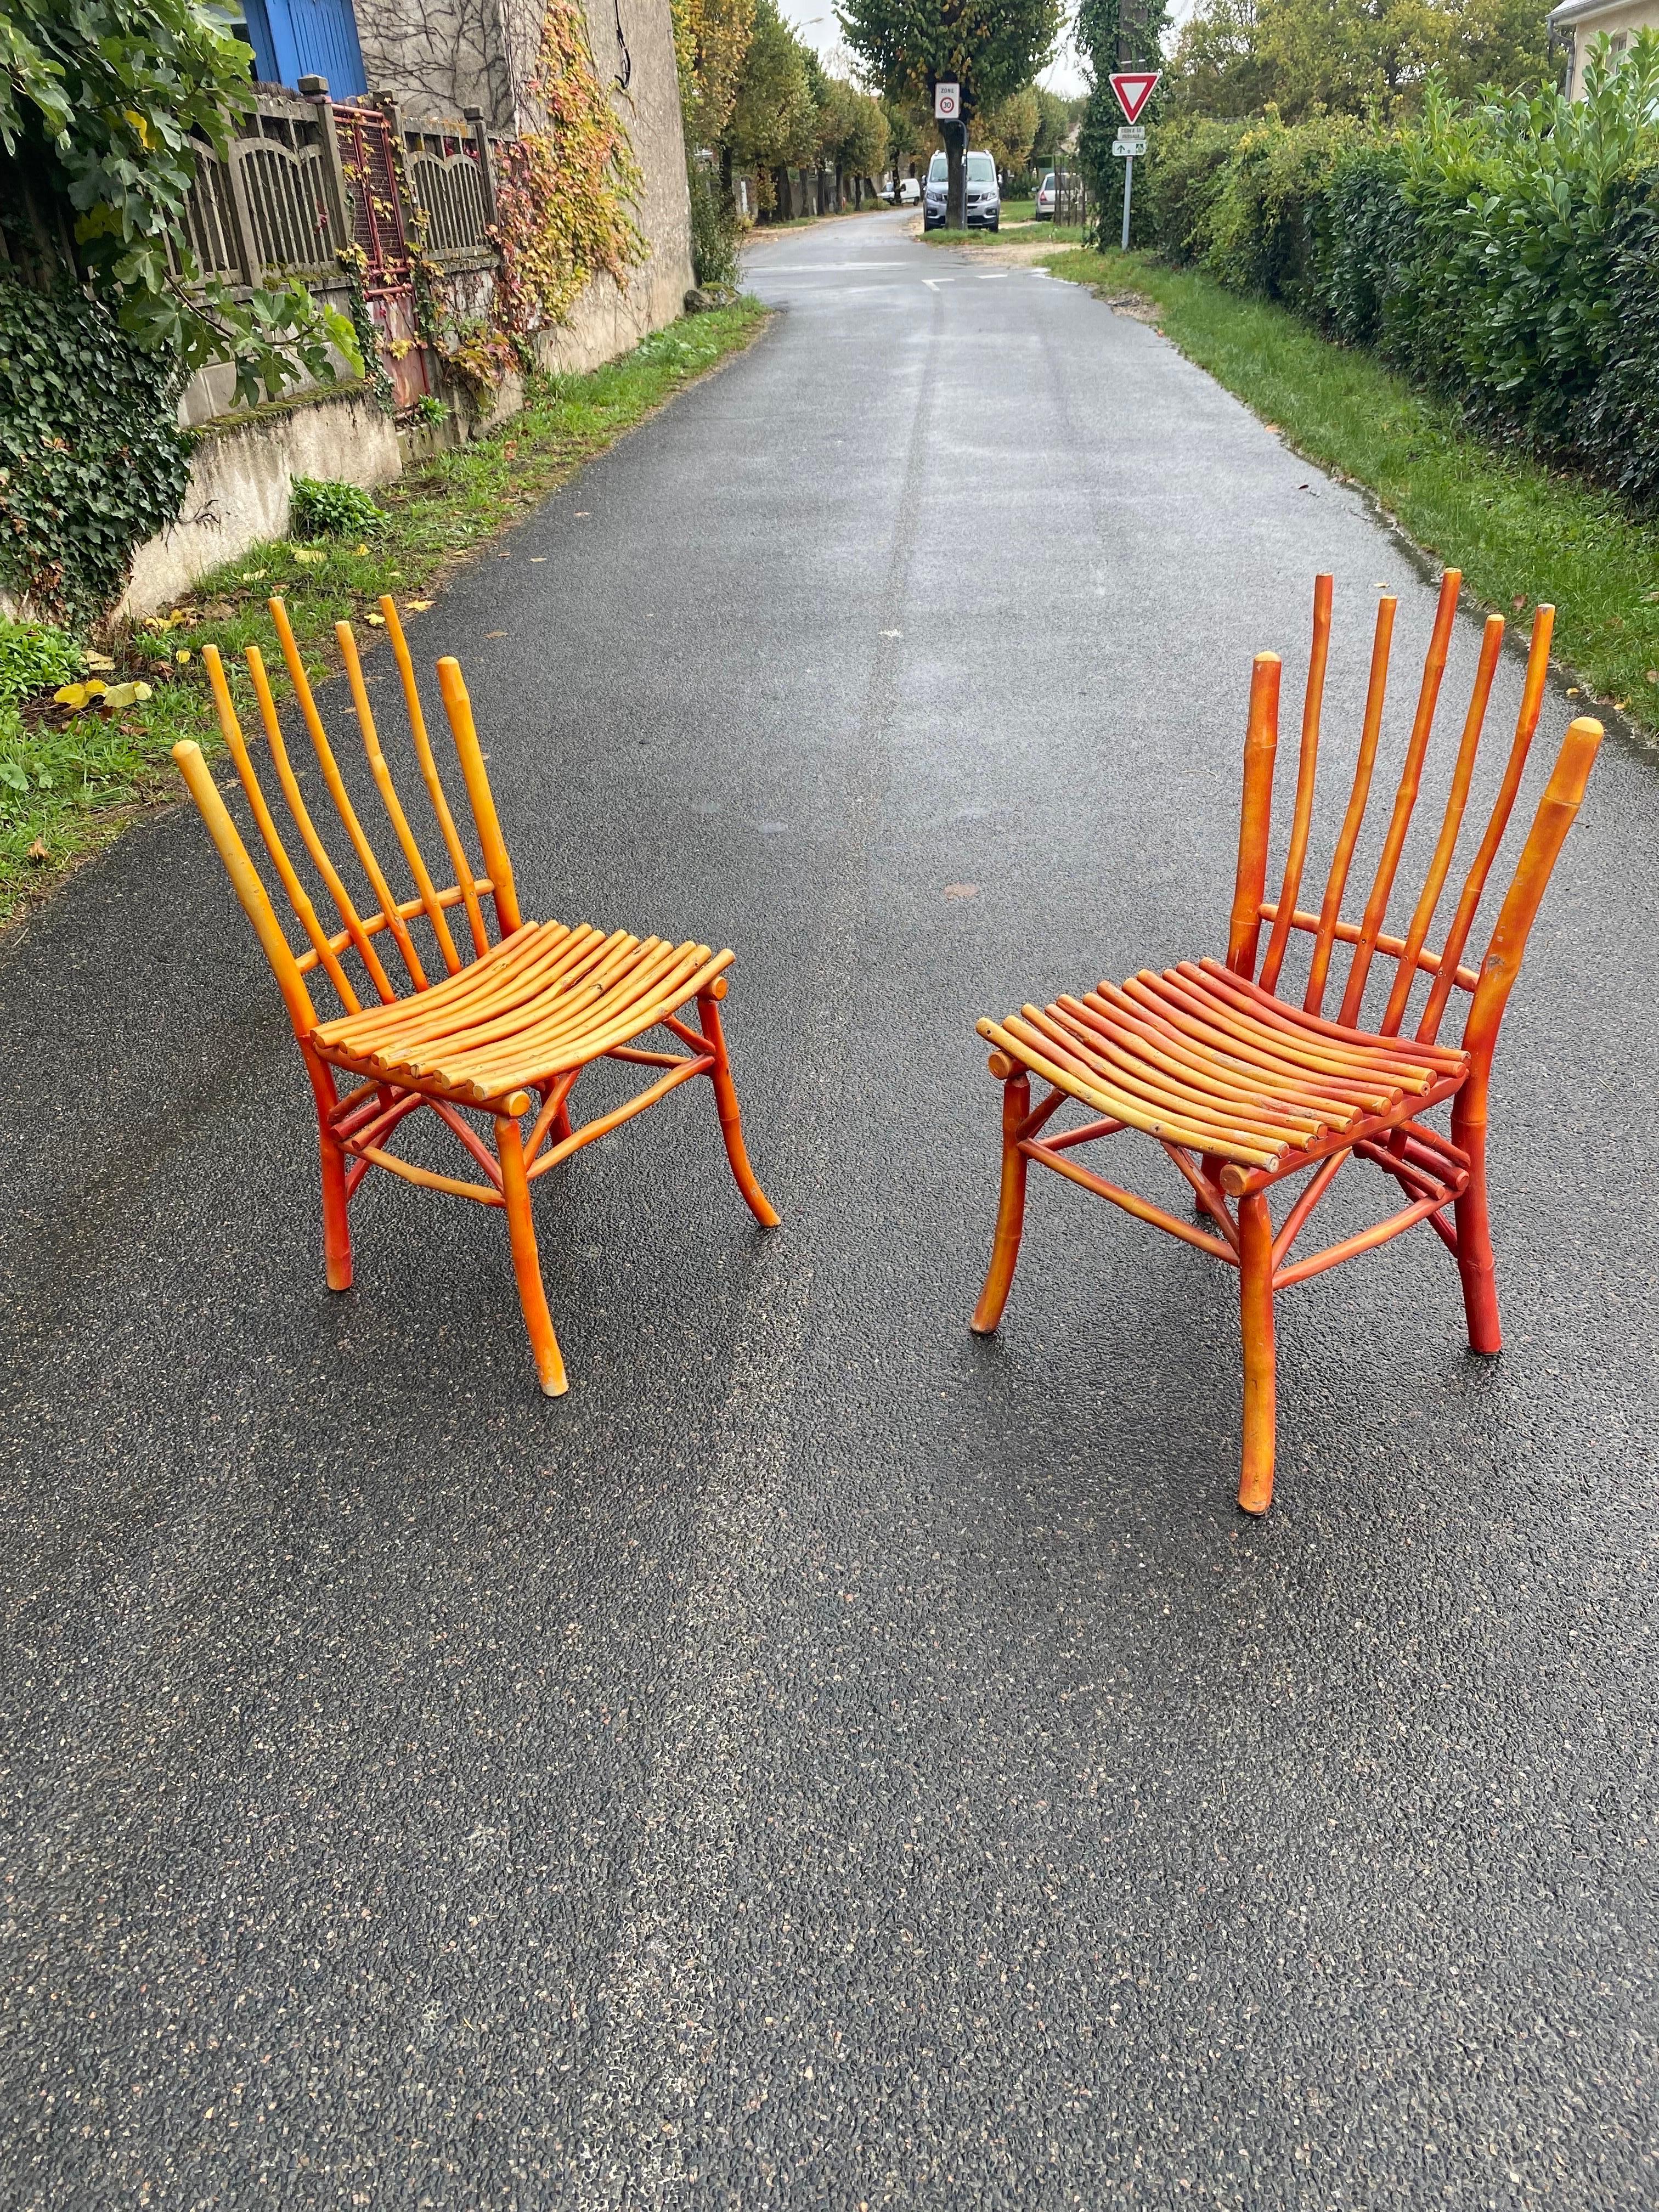 Pair of lacquered wooden chairs, imitating bamboo circa 1950;
structure in very good condition, small lack of paint.